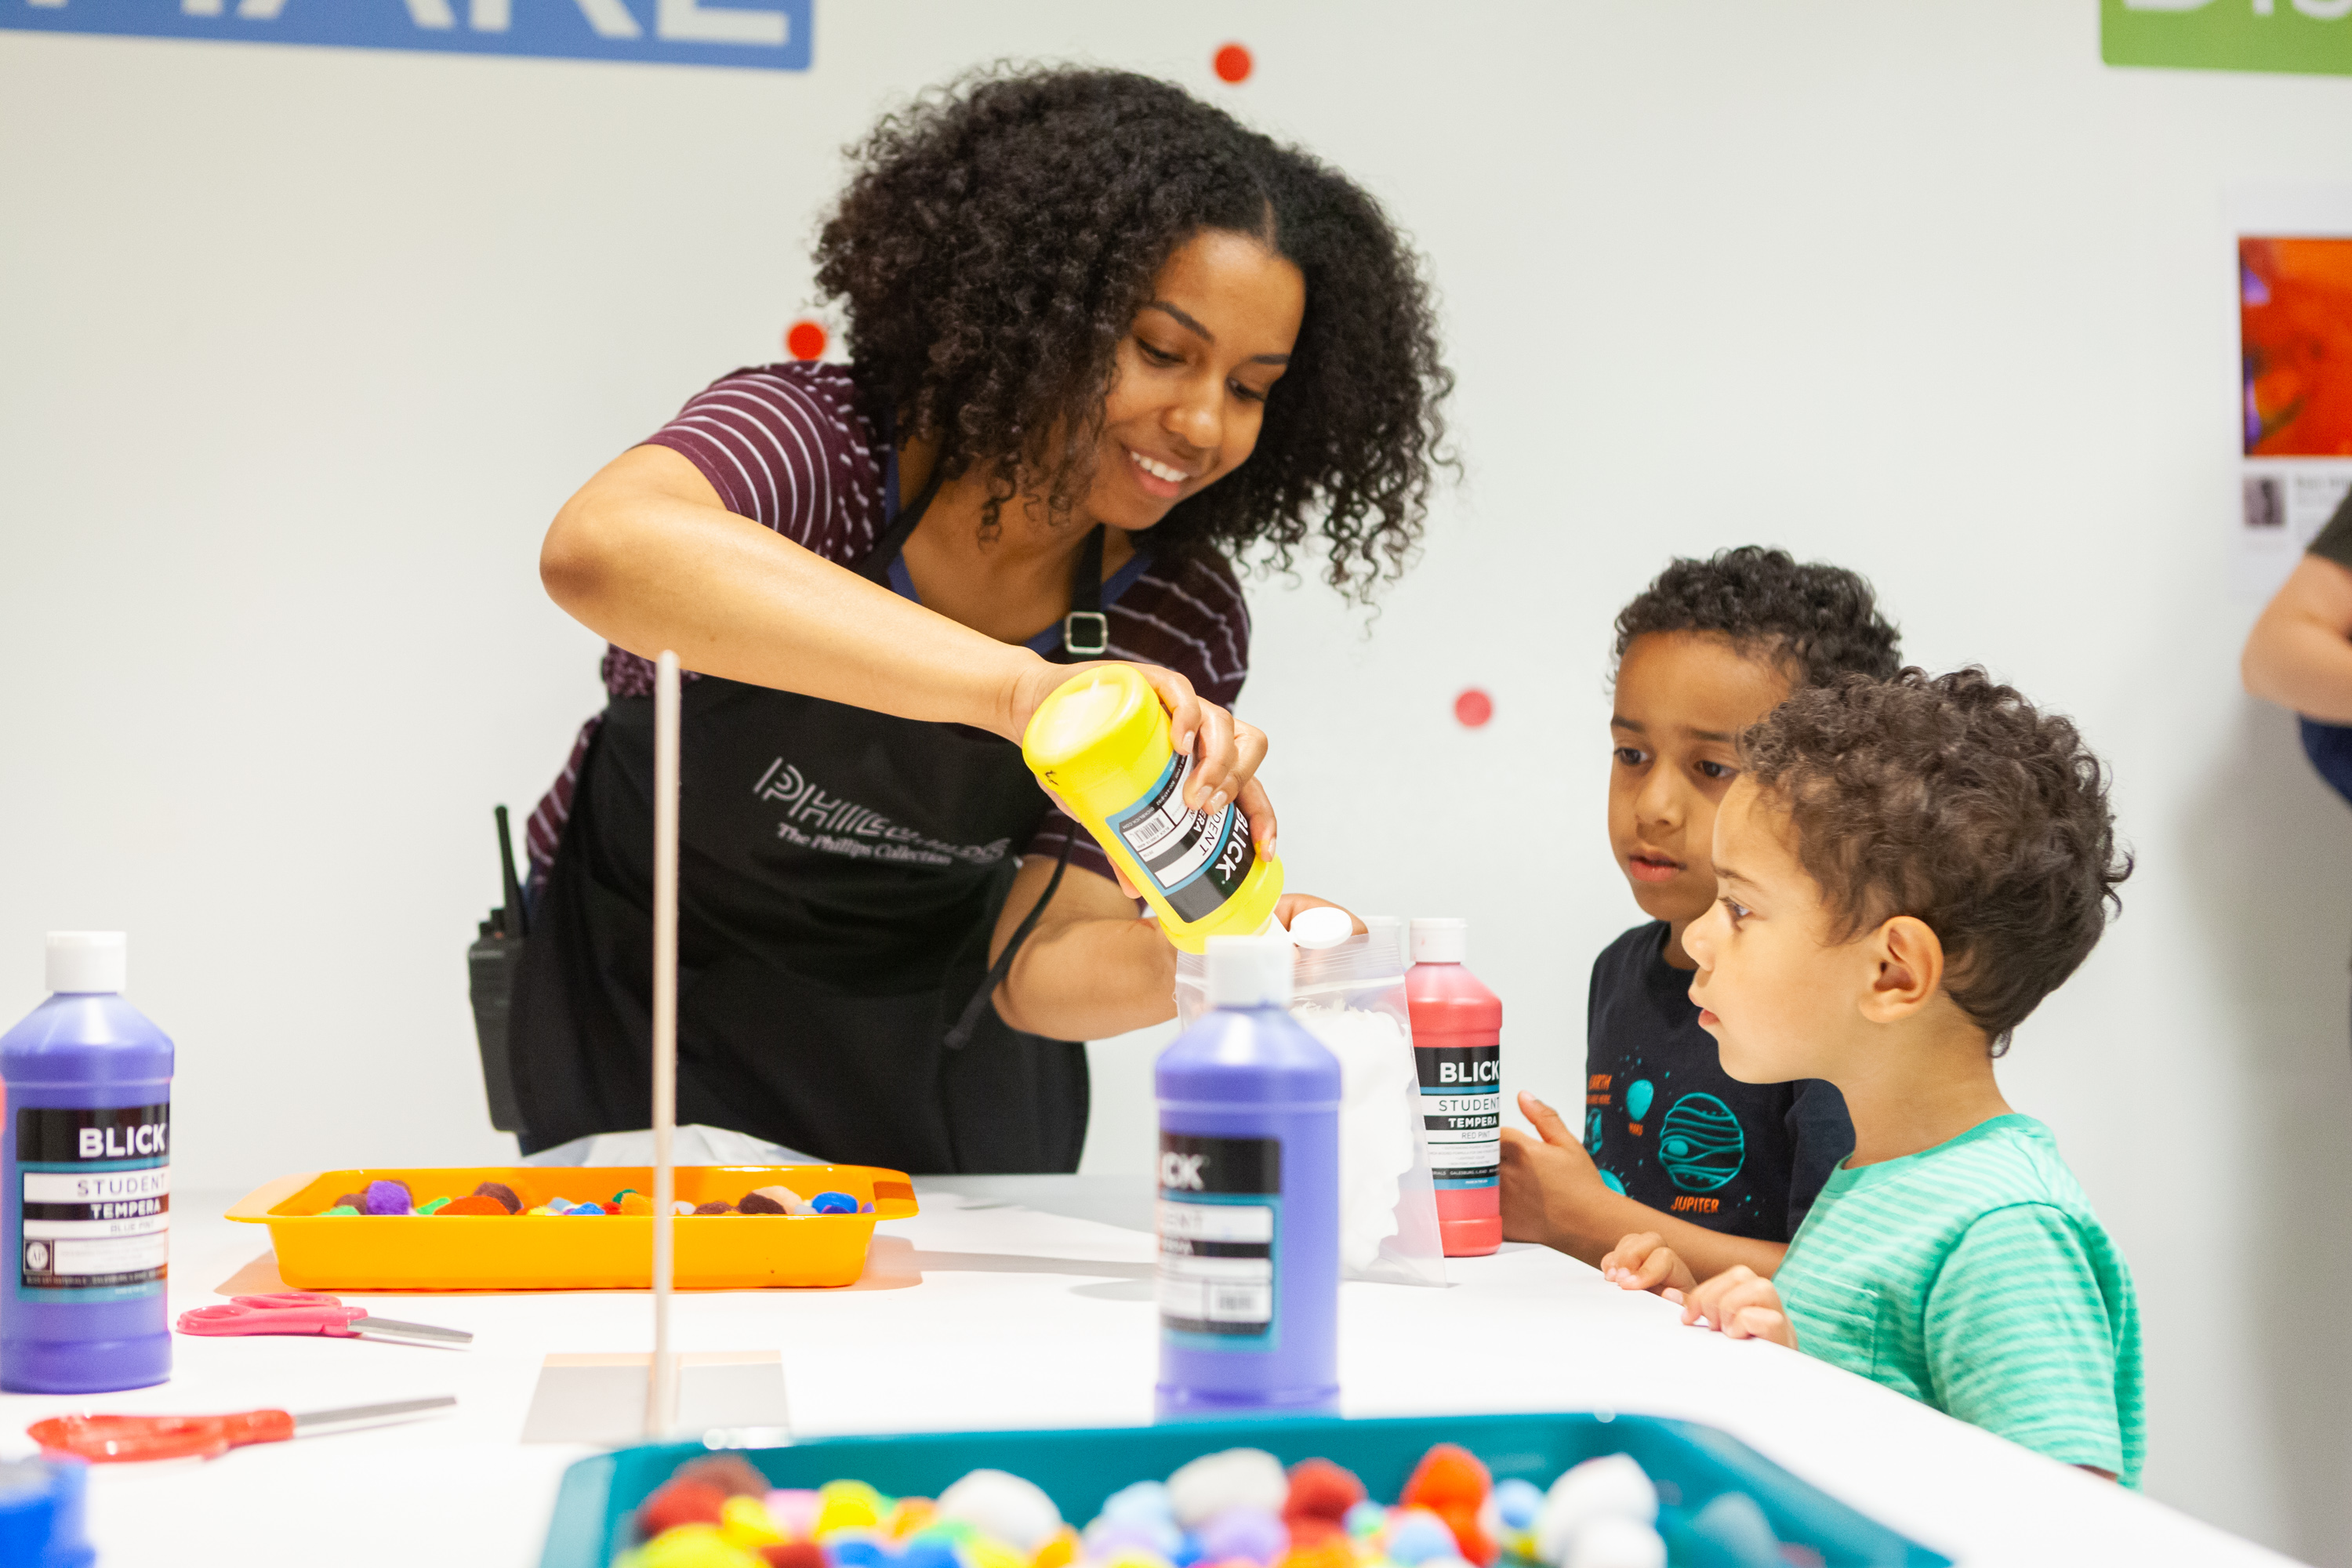 Photograph of a woman helping two small children prepare paints